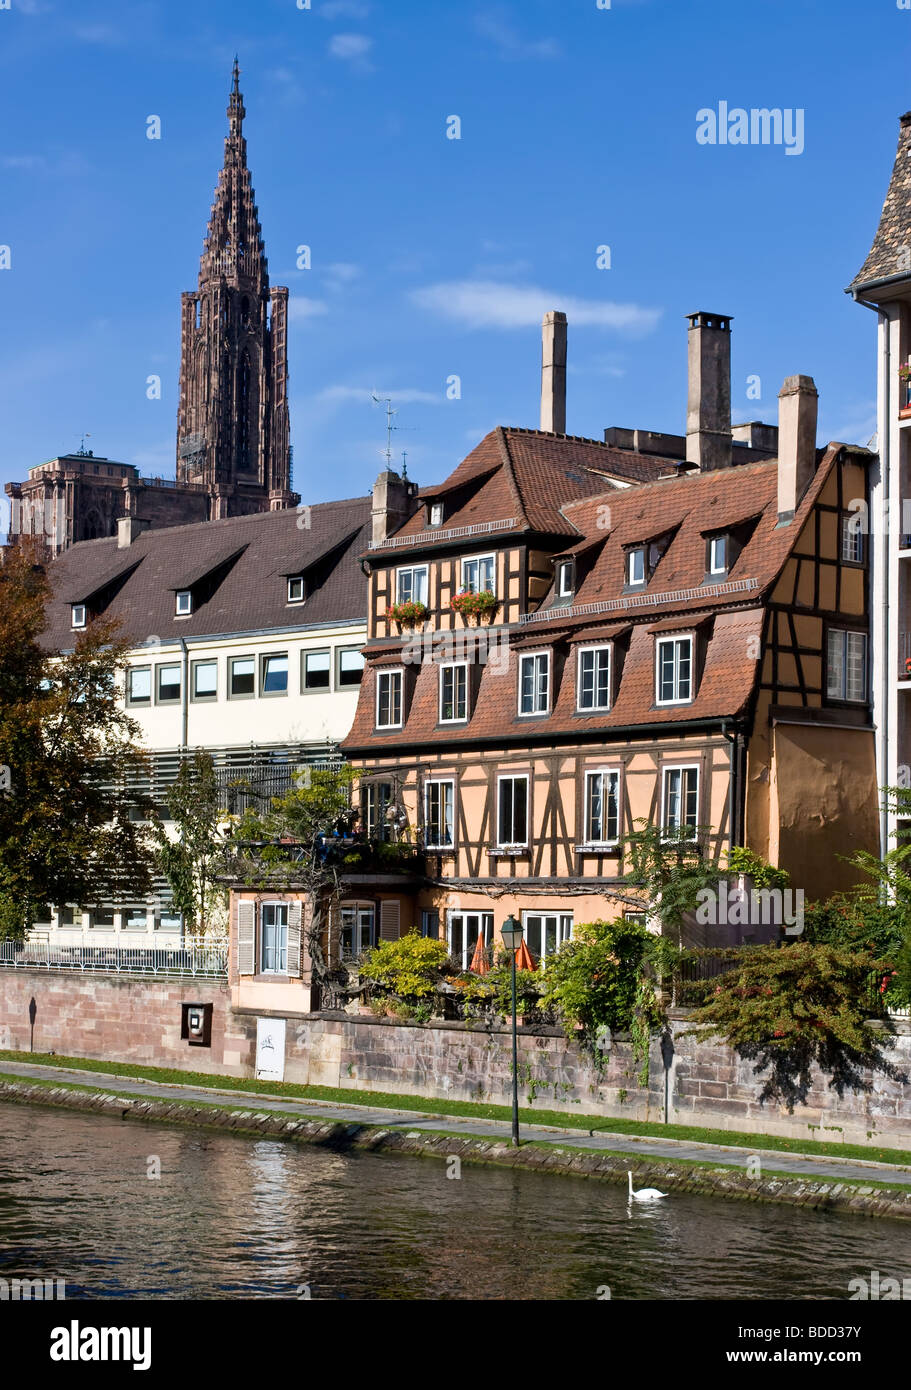 Canalside houses in Strasbourg with the gothic cathedral spire in the background Stock Photo